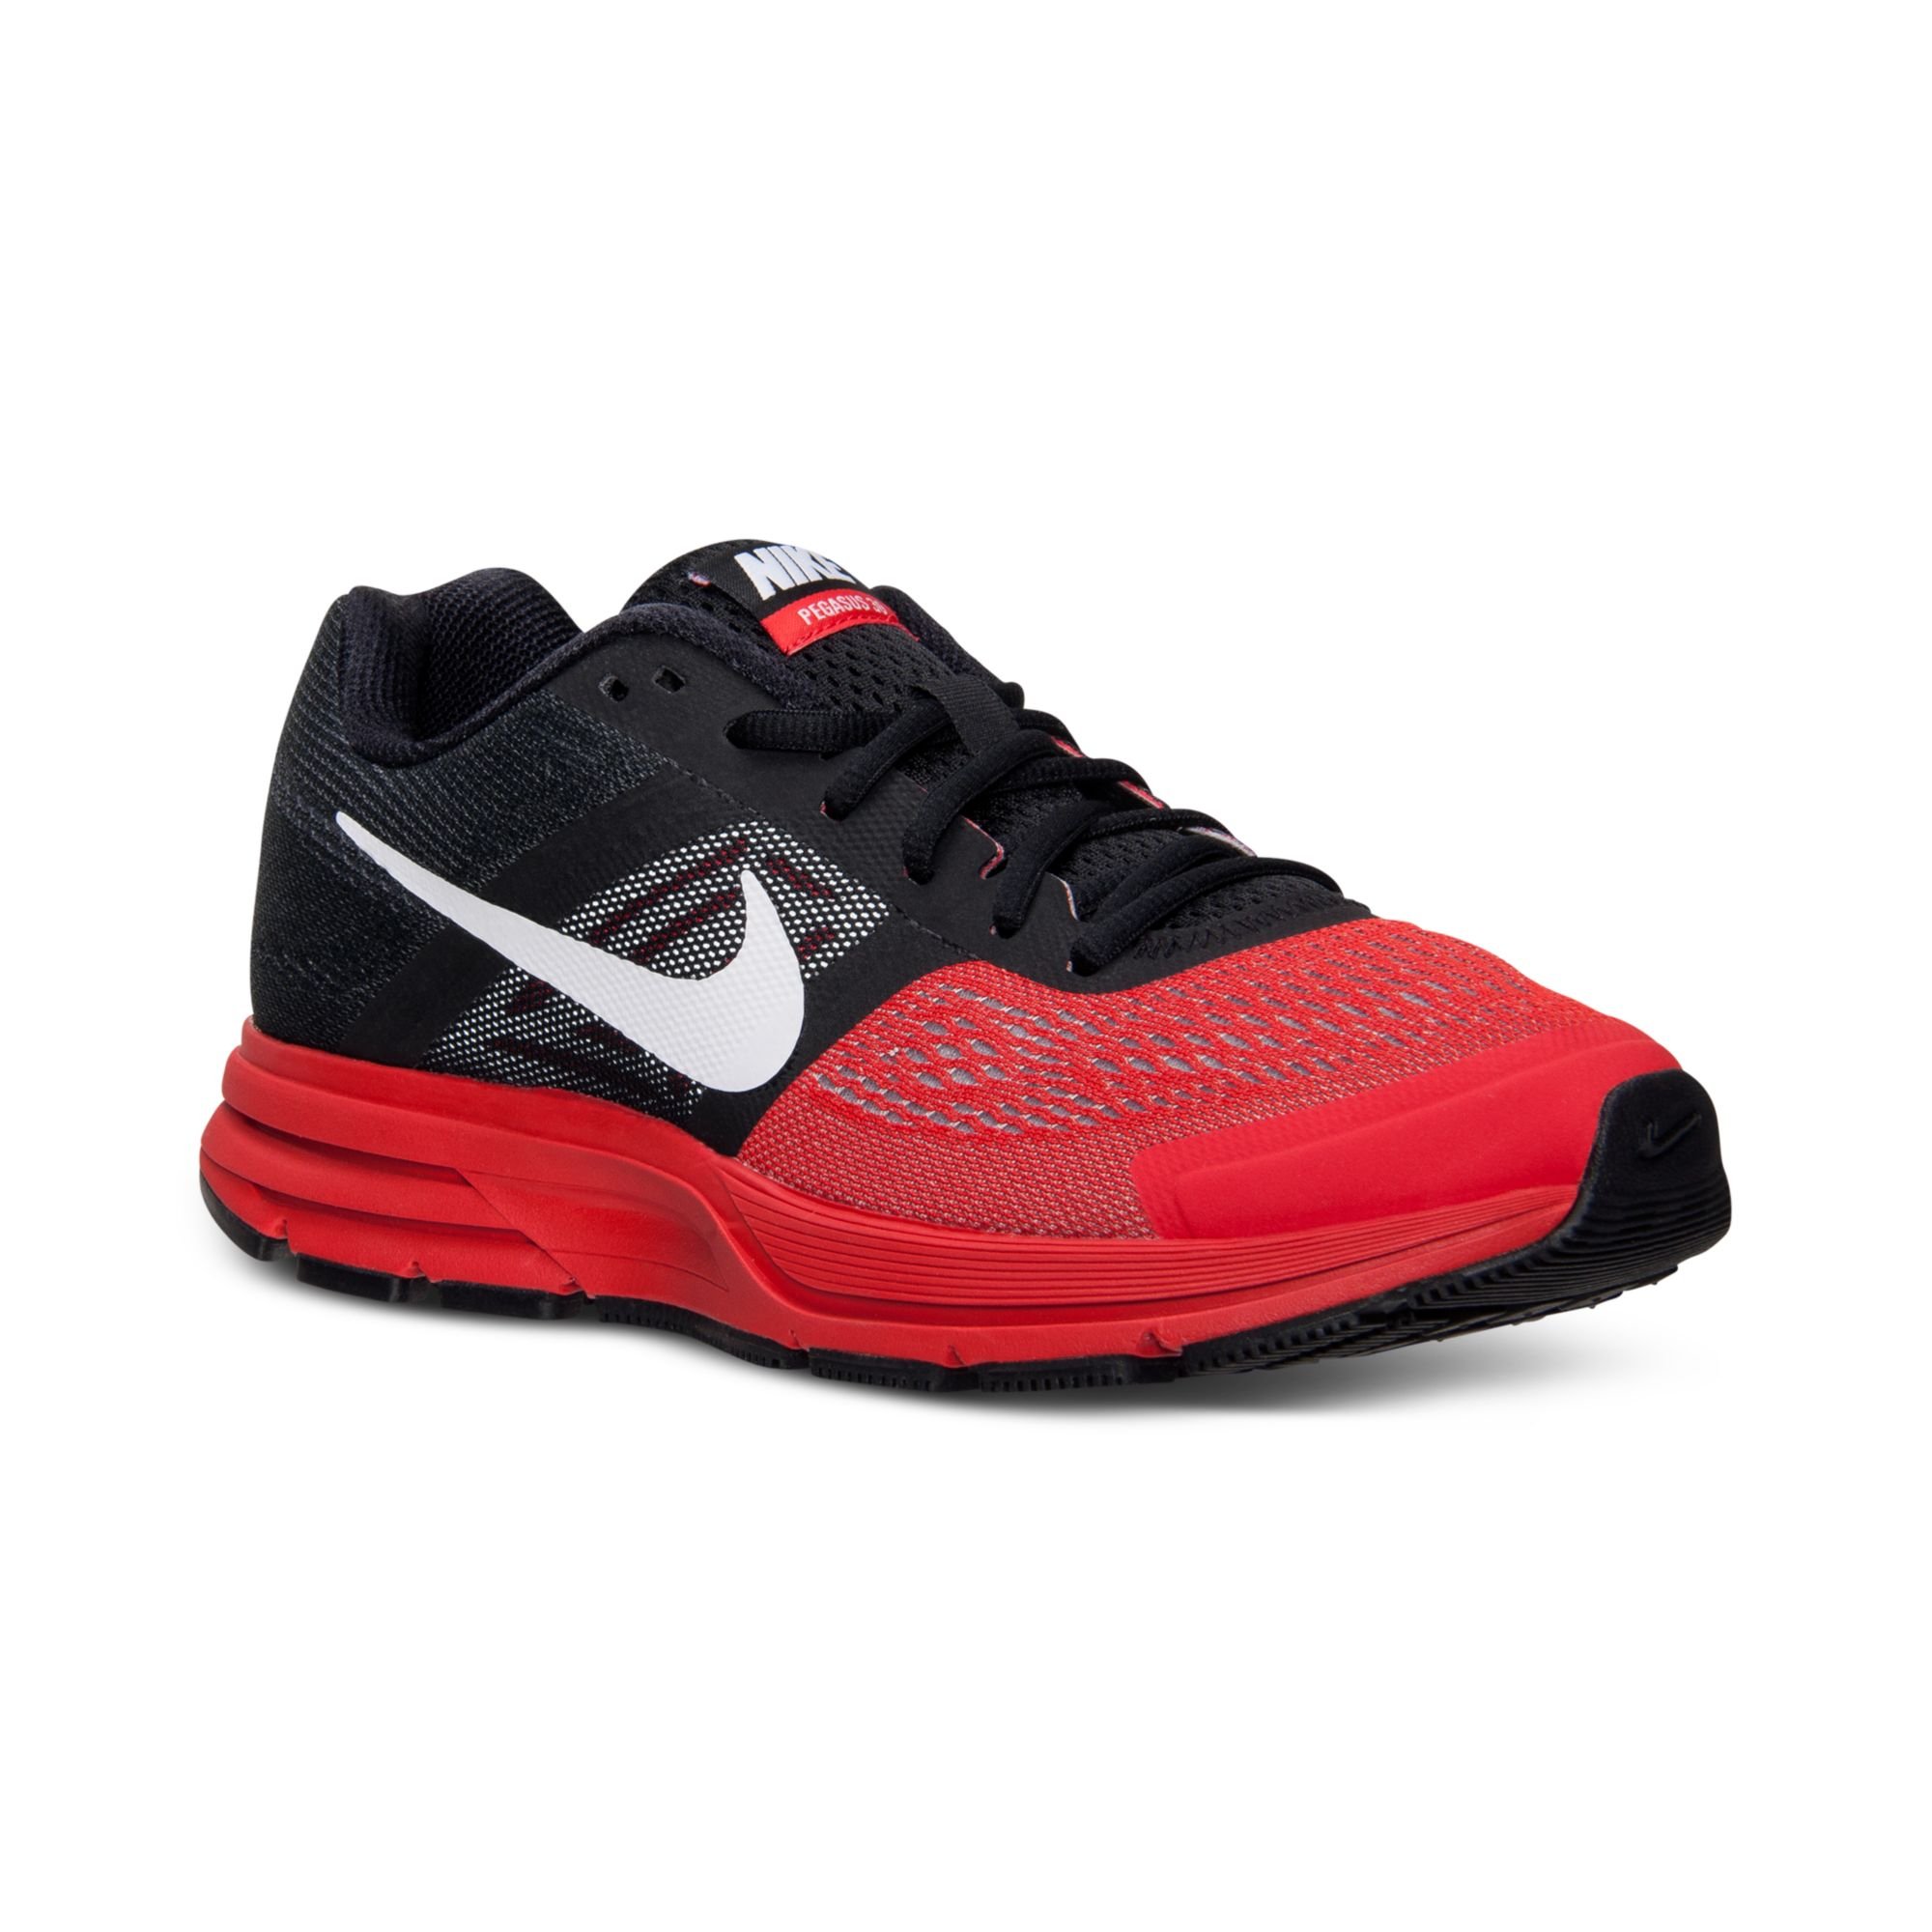 Lyst - Nike Mens Air Pegasus 30 Running Shoes From Finish ...